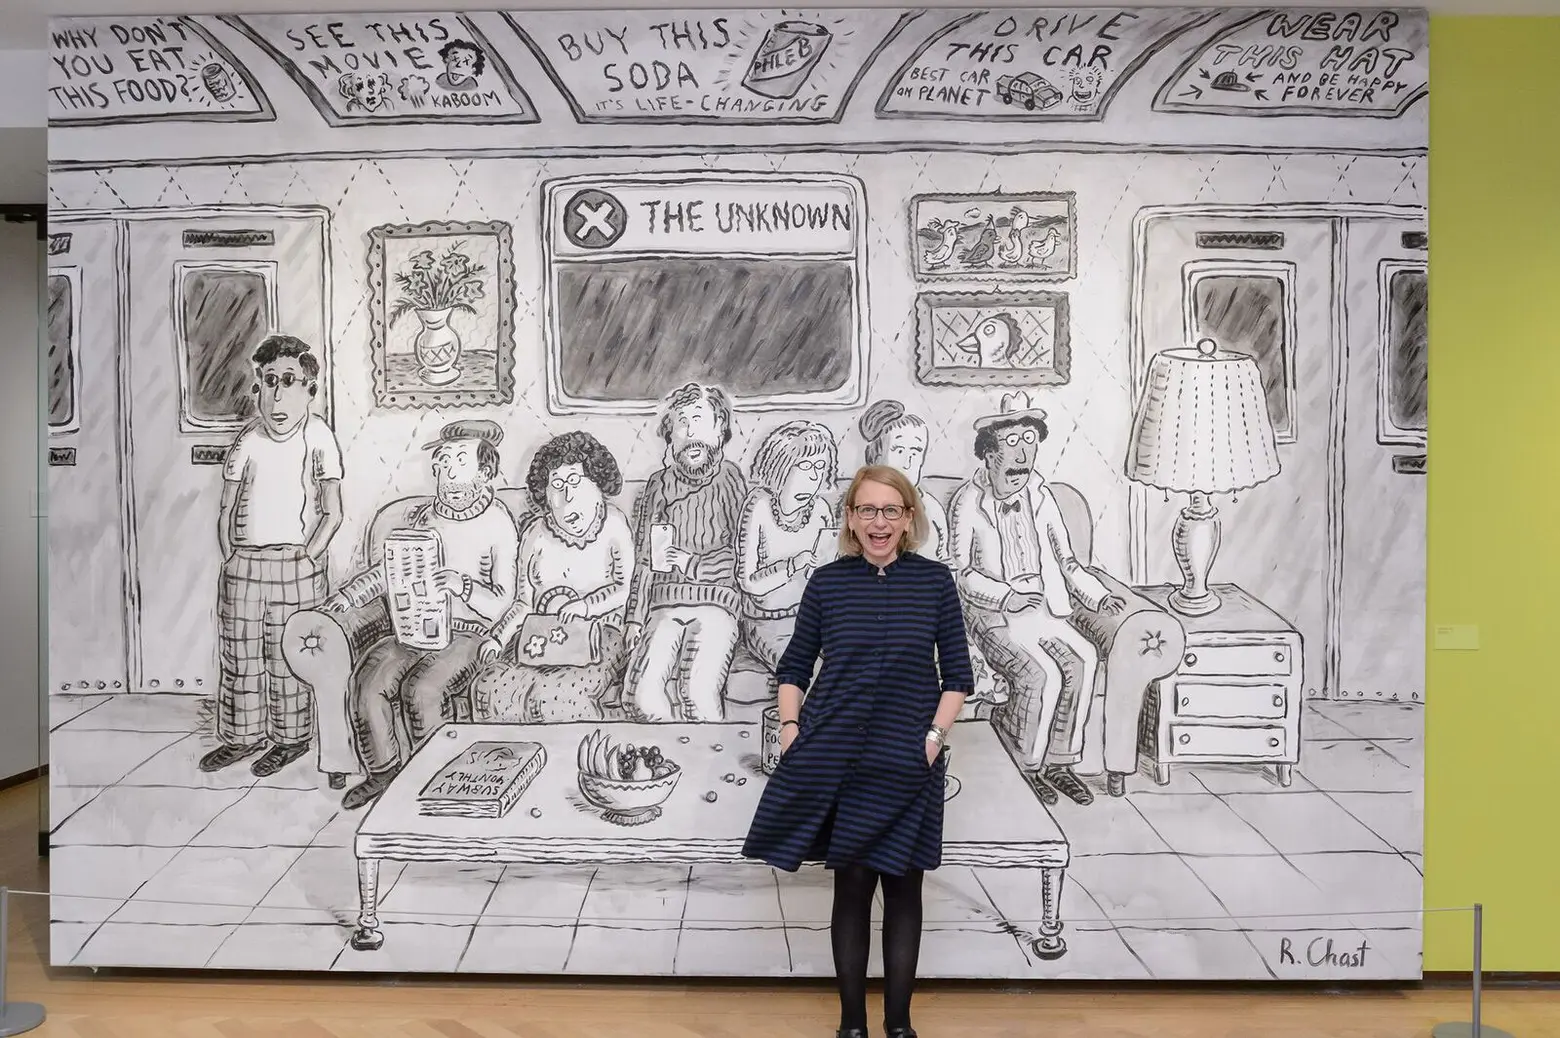 roz chast 'subway sofa' for the new yorker